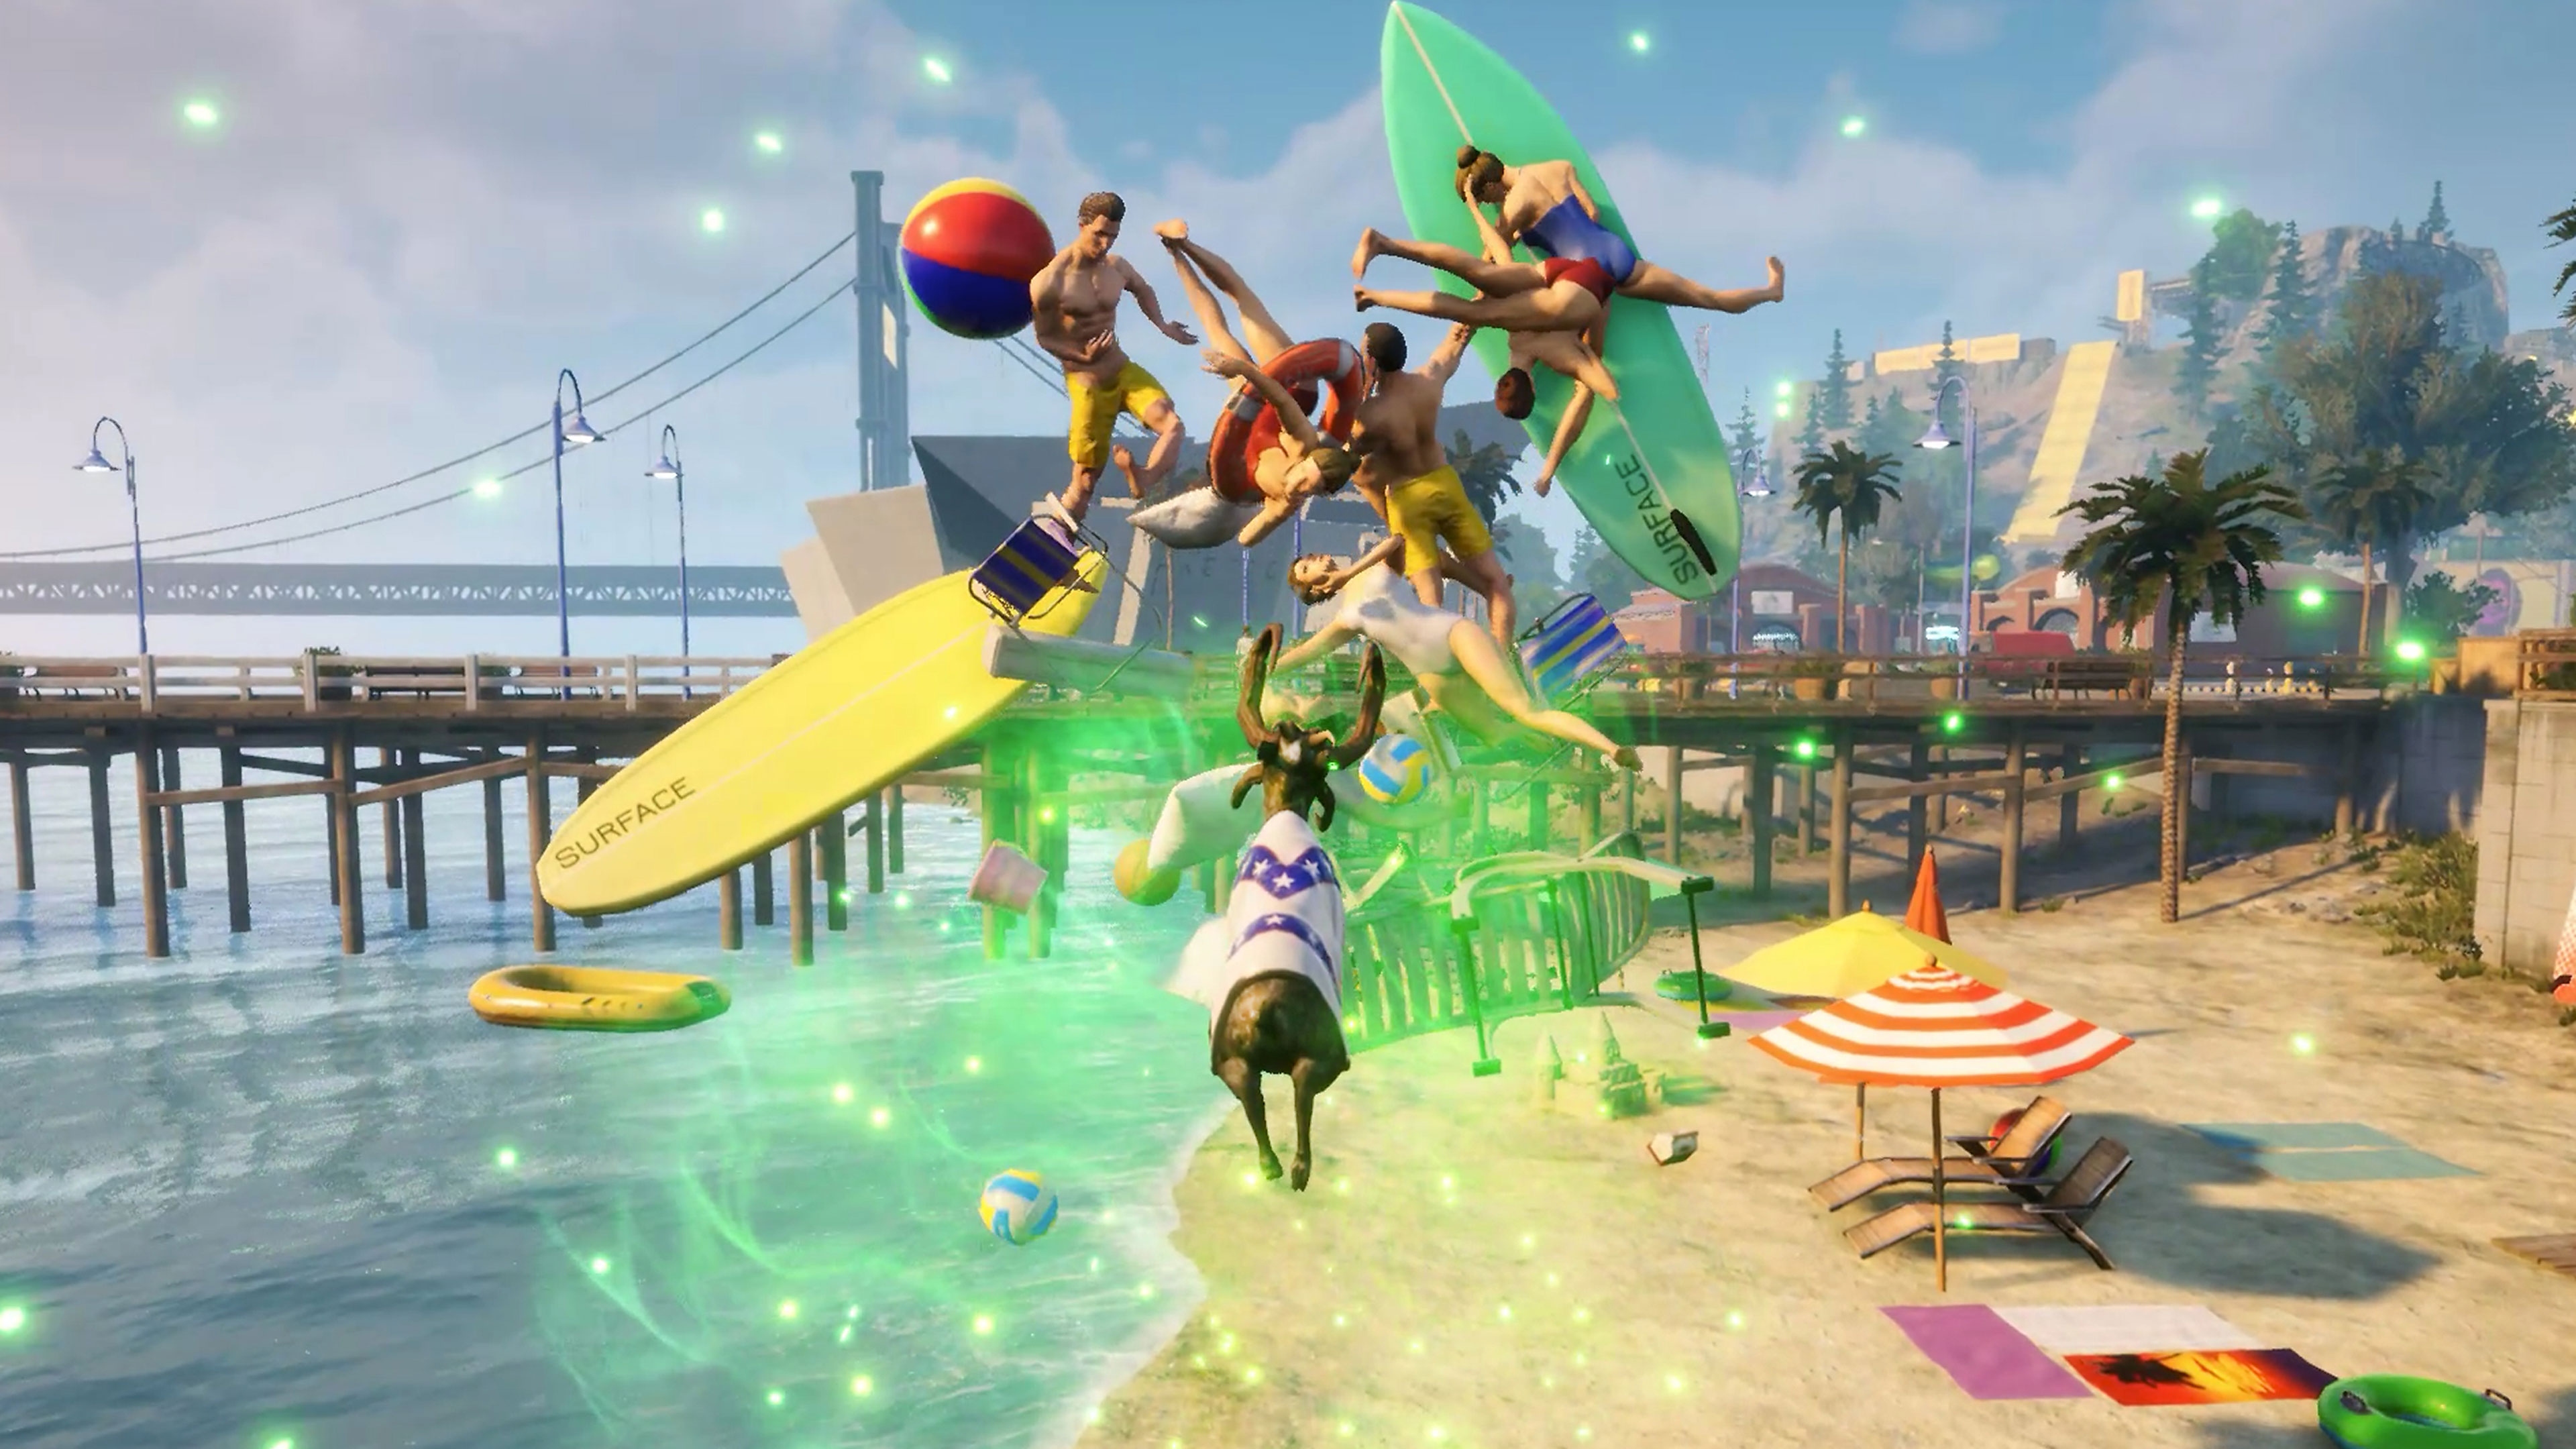 Goat Simulator 3 showing a beach scene with surfers and surf boards tumbling in mid-air